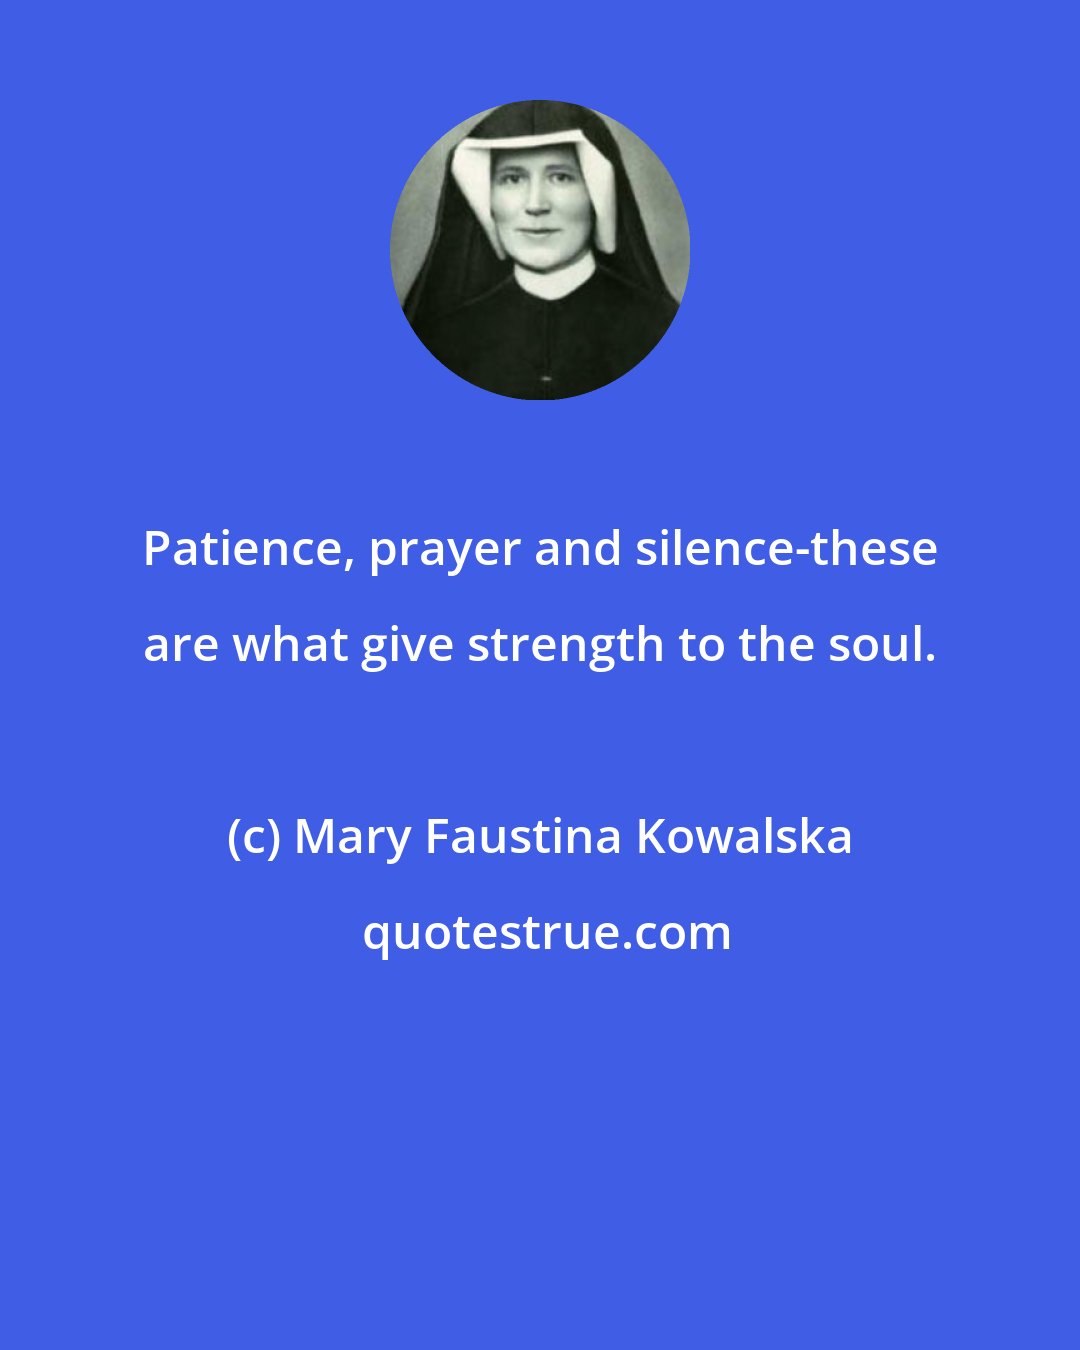 Mary Faustina Kowalska: Patience, prayer and silence-these are what give strength to the soul.